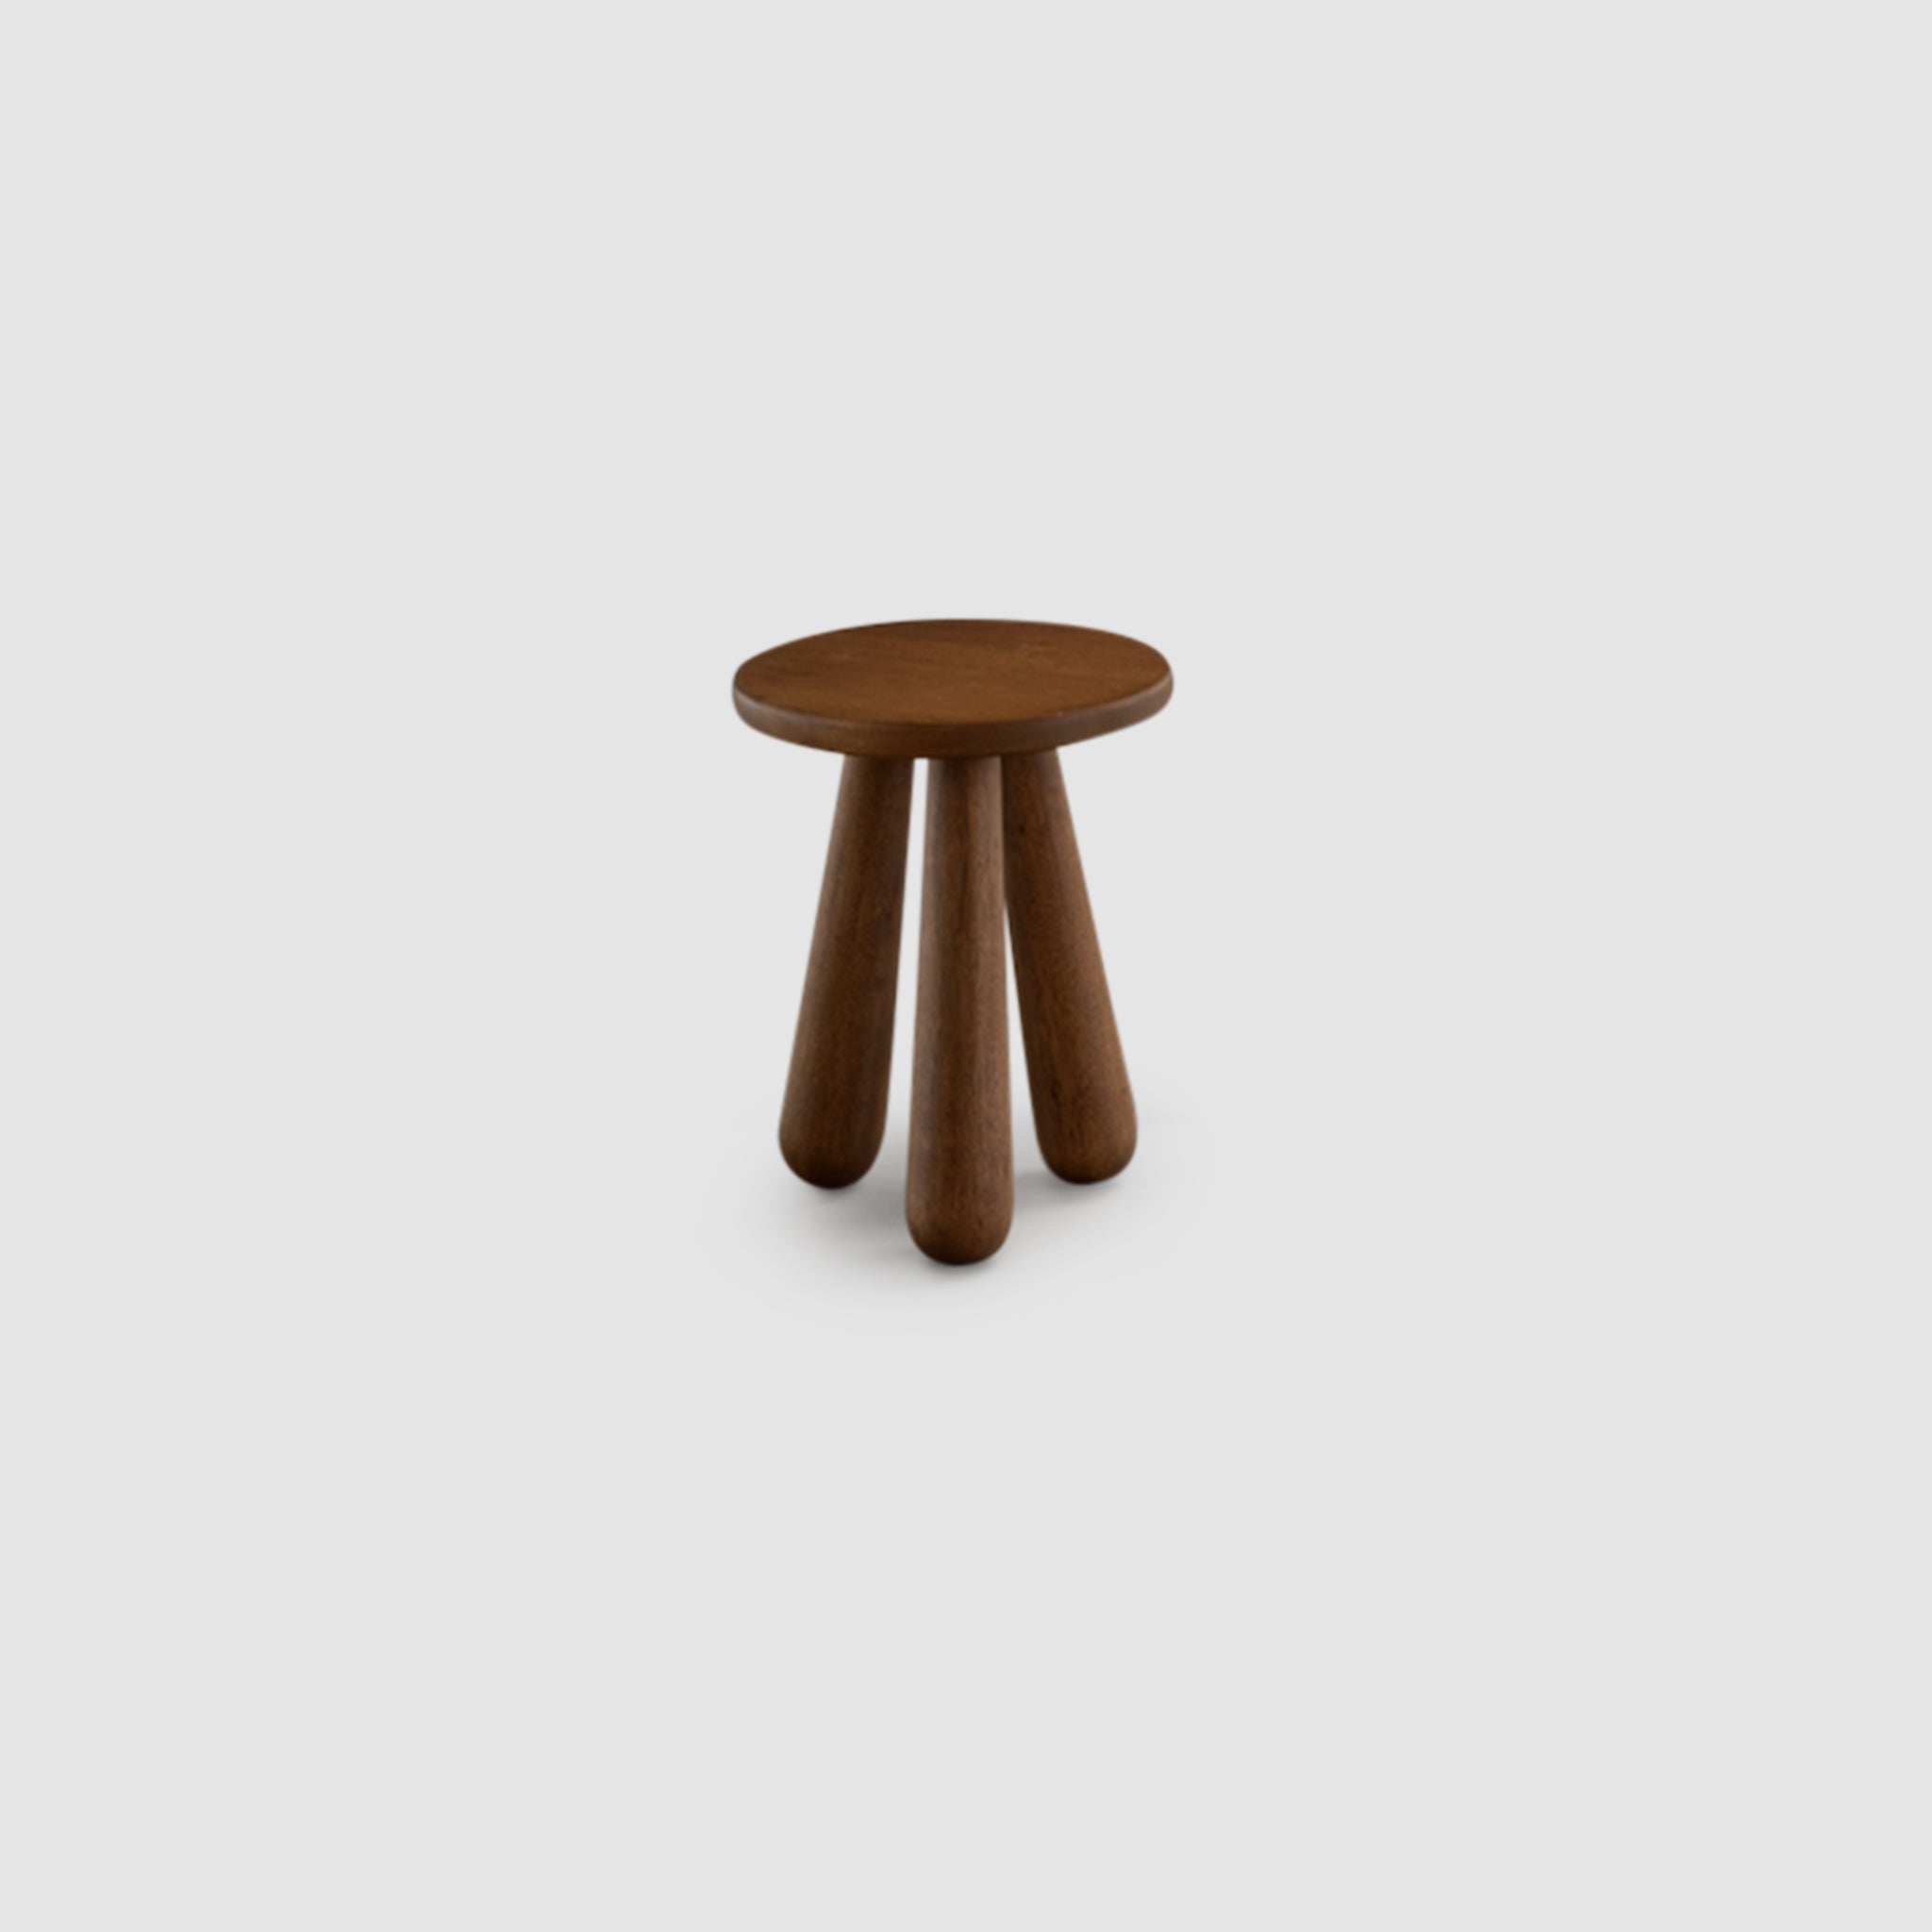 Brown wooden stool with chunky, rounded legs and a round seat on a white background